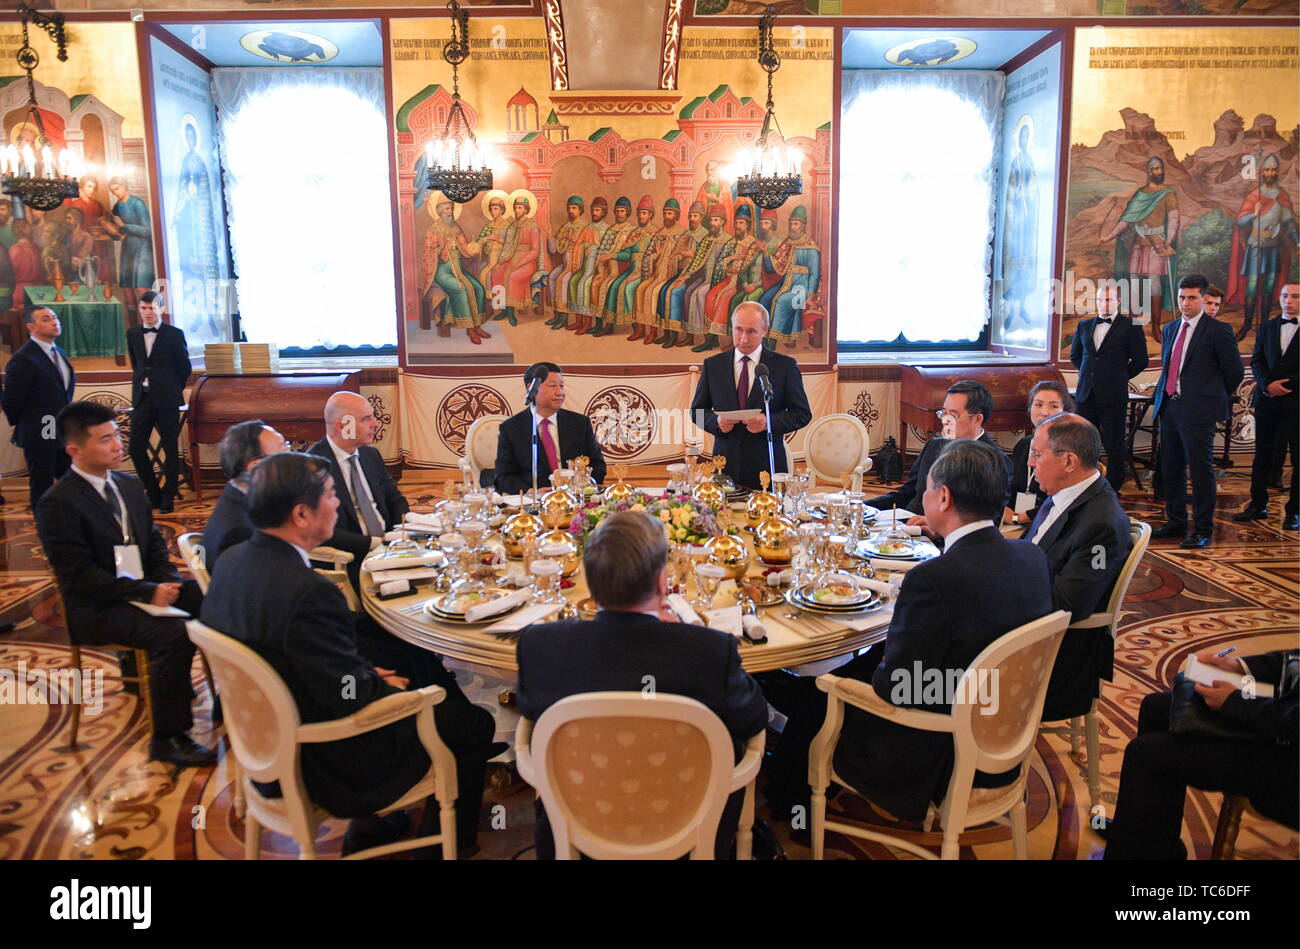 moscow-russia-05th-june-2019-moscow-russia-june-5-2019-chinas-president-xi-jinping-and-russias-president-vladimir-putin-l-r-centre-during-a-formal-dinner-on-behalf-of-the-russian-president-for-the-president-of-china-at-the-hall-of-the-facets-of-the-moscow-kremlin-alexei-druzhininrussian-presidential-press-and-information-officetass-credit-itar-tass-news-agencyalamy-live-news-TC6DFF.jpg